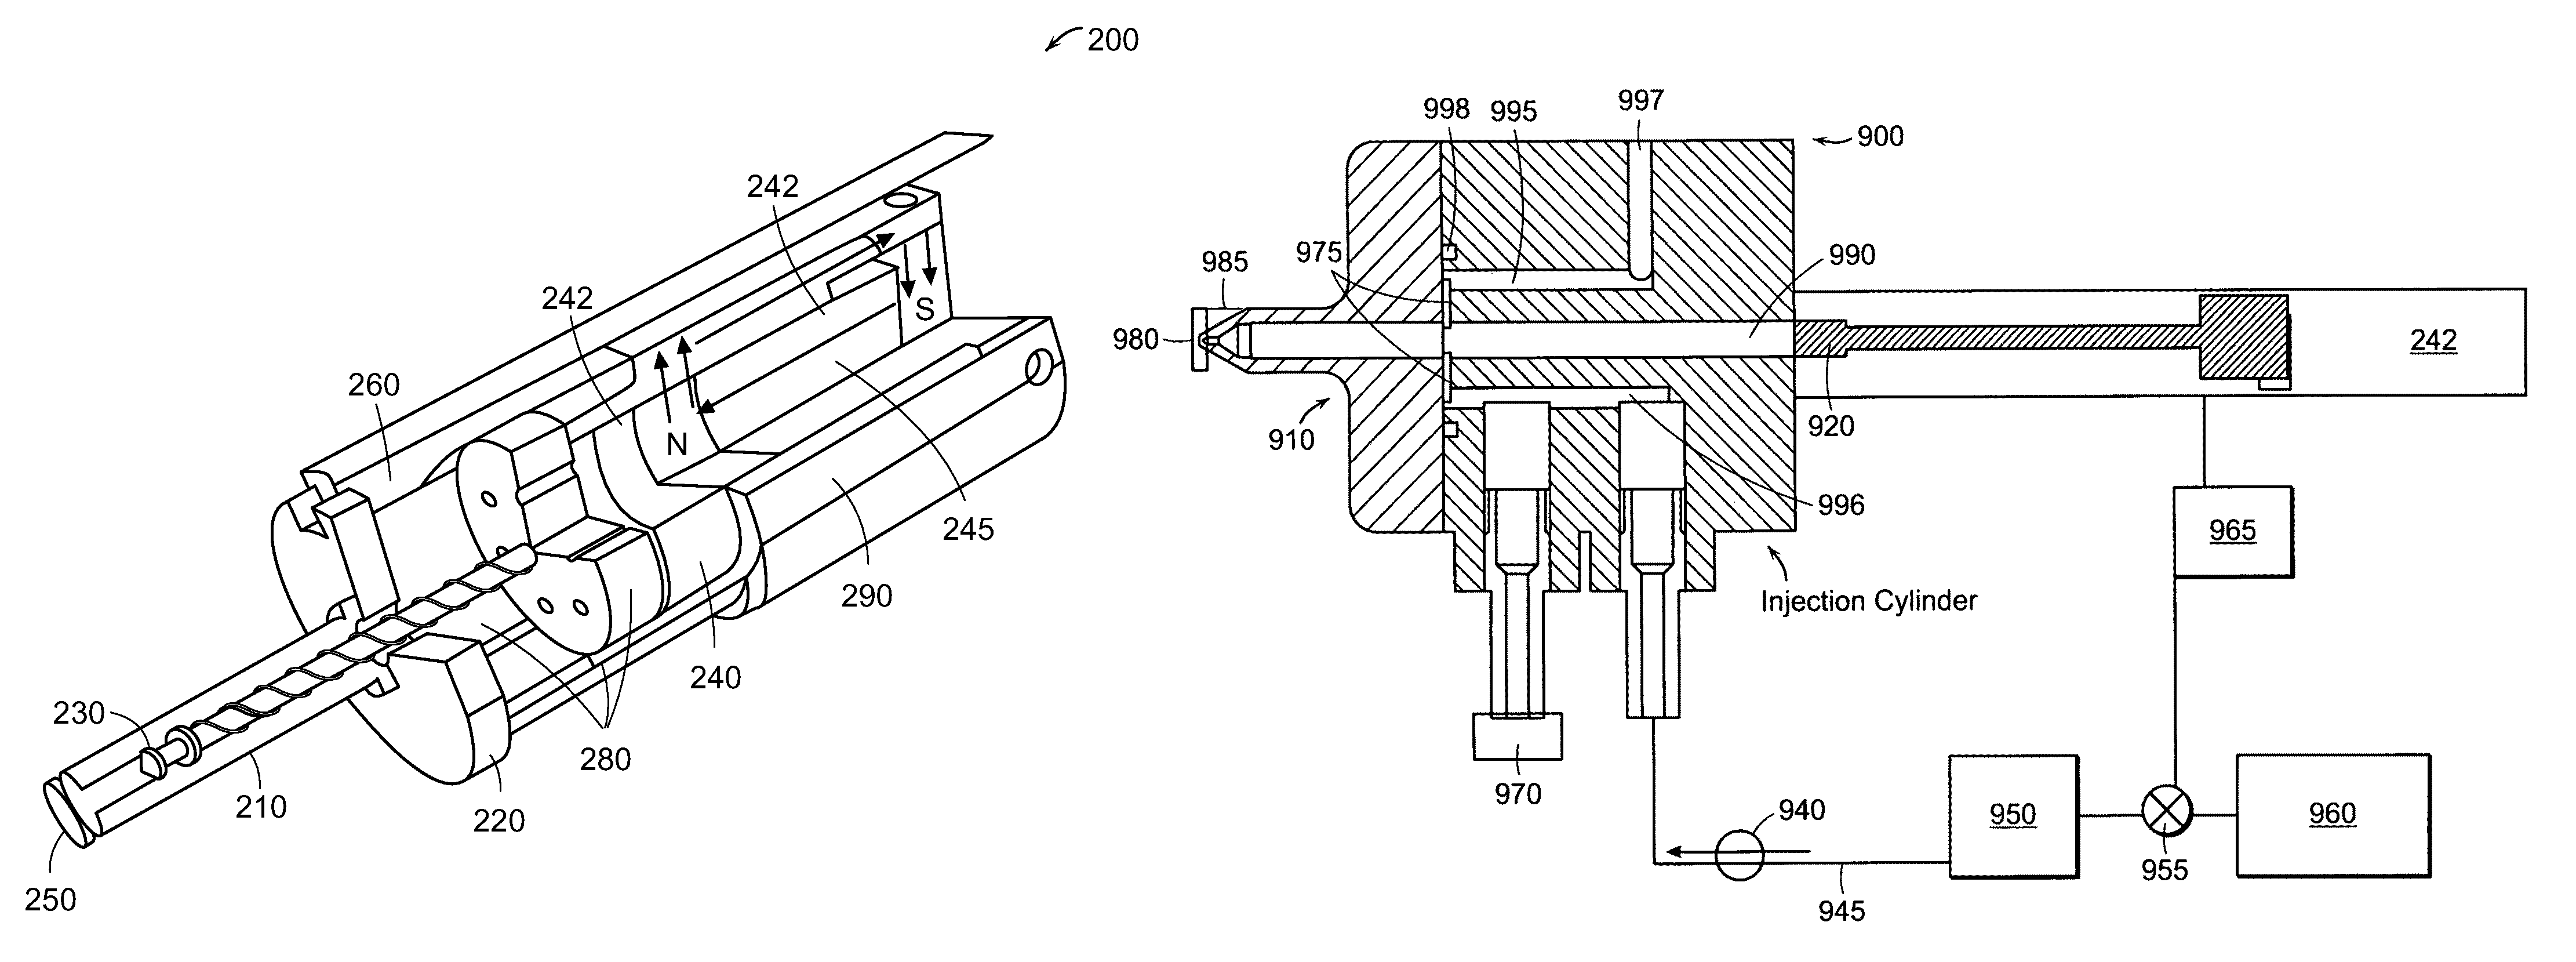 Needle-free injector device with autoloading capability